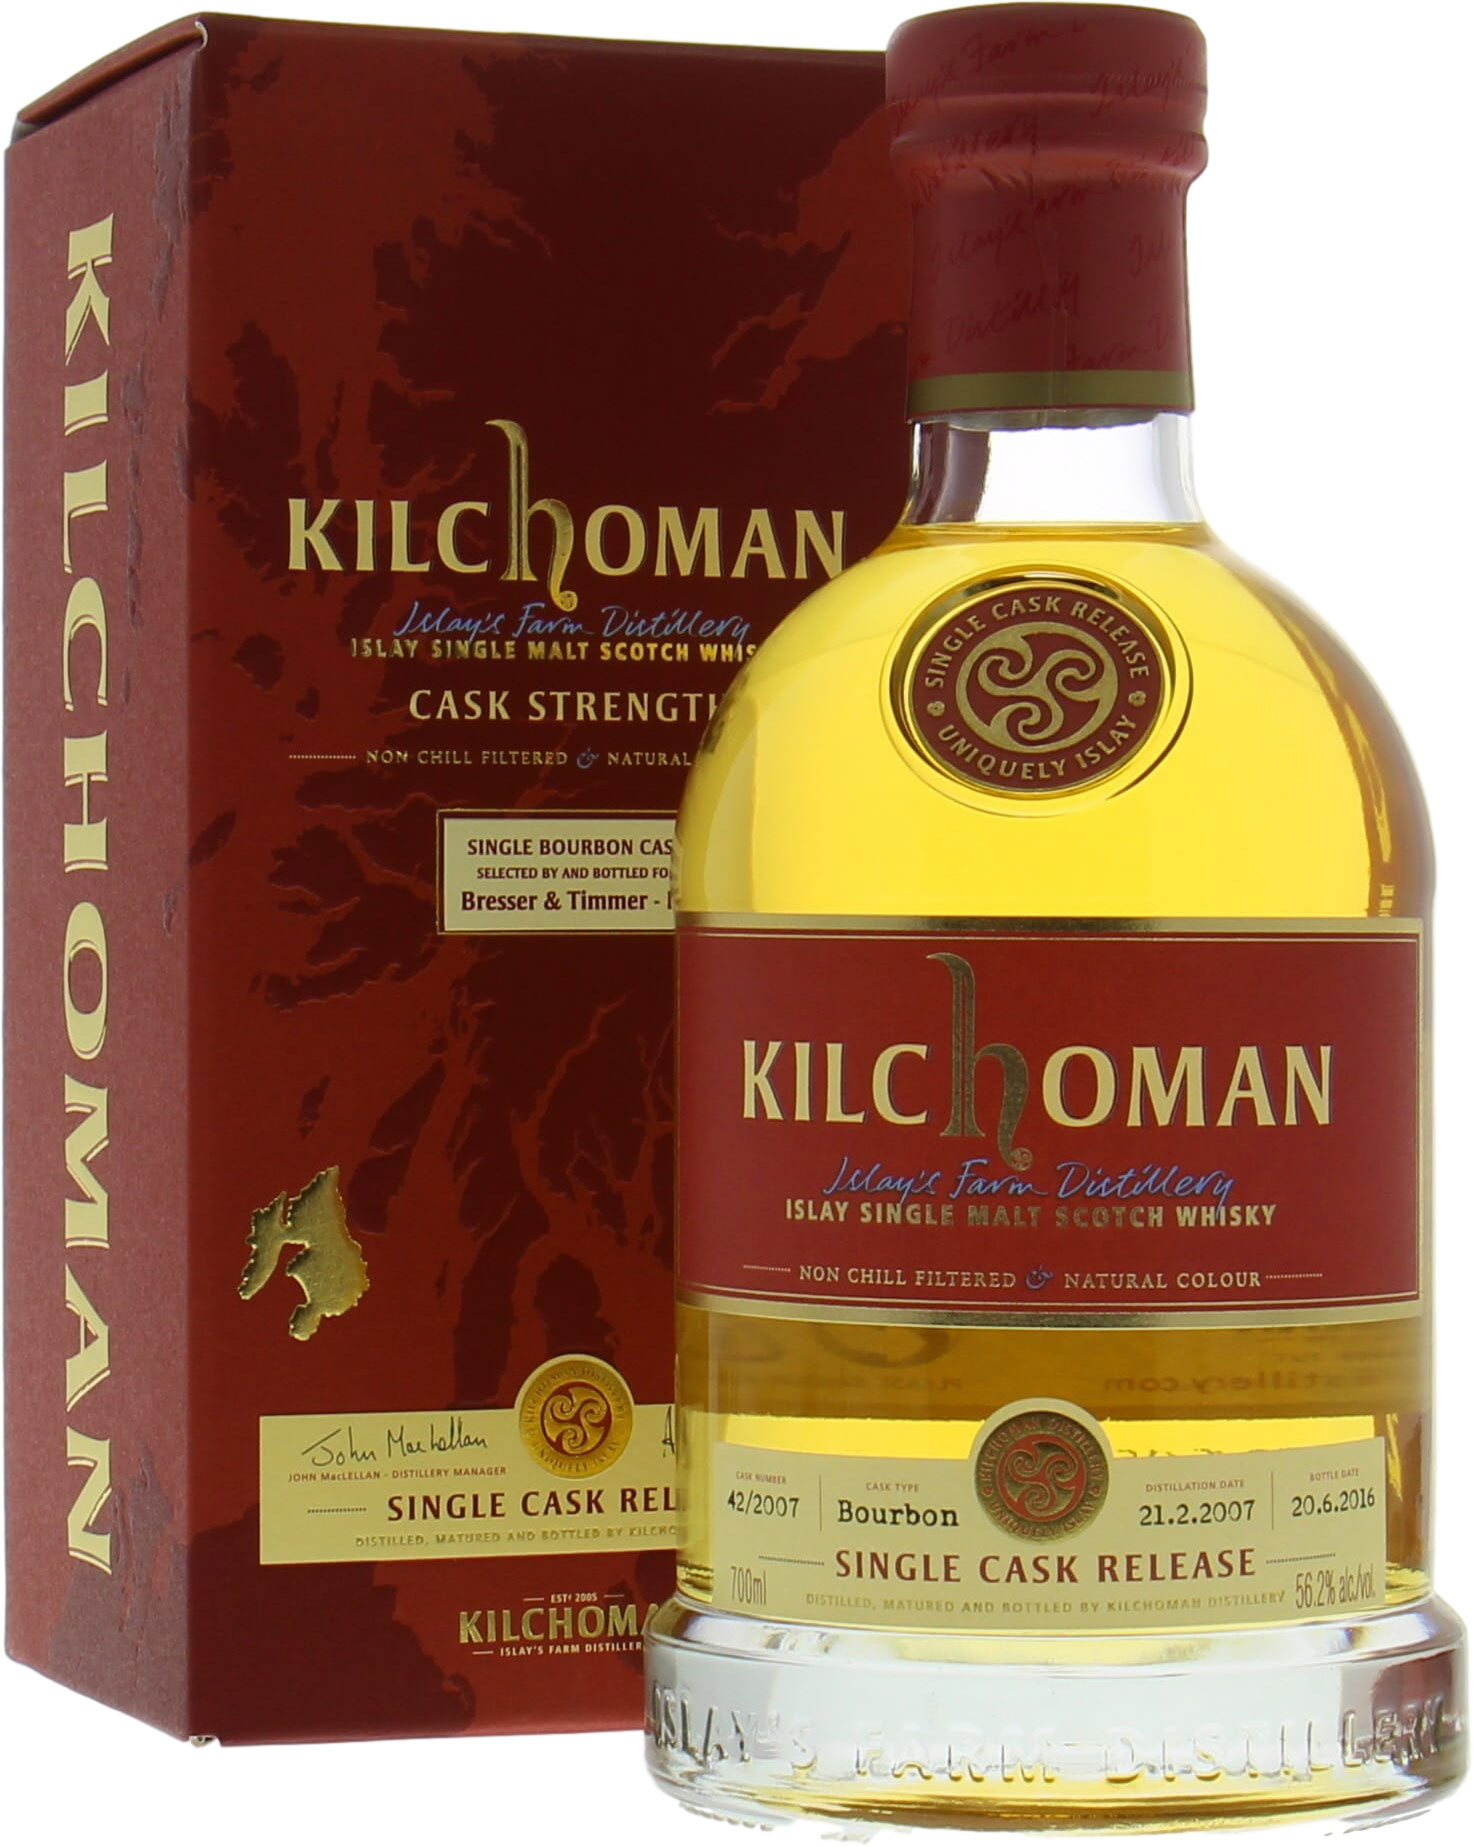 Kilchoman - 9 Years Old Cask 42/2007 For Bresser & Timmer 56.2% 2007 In Original Container